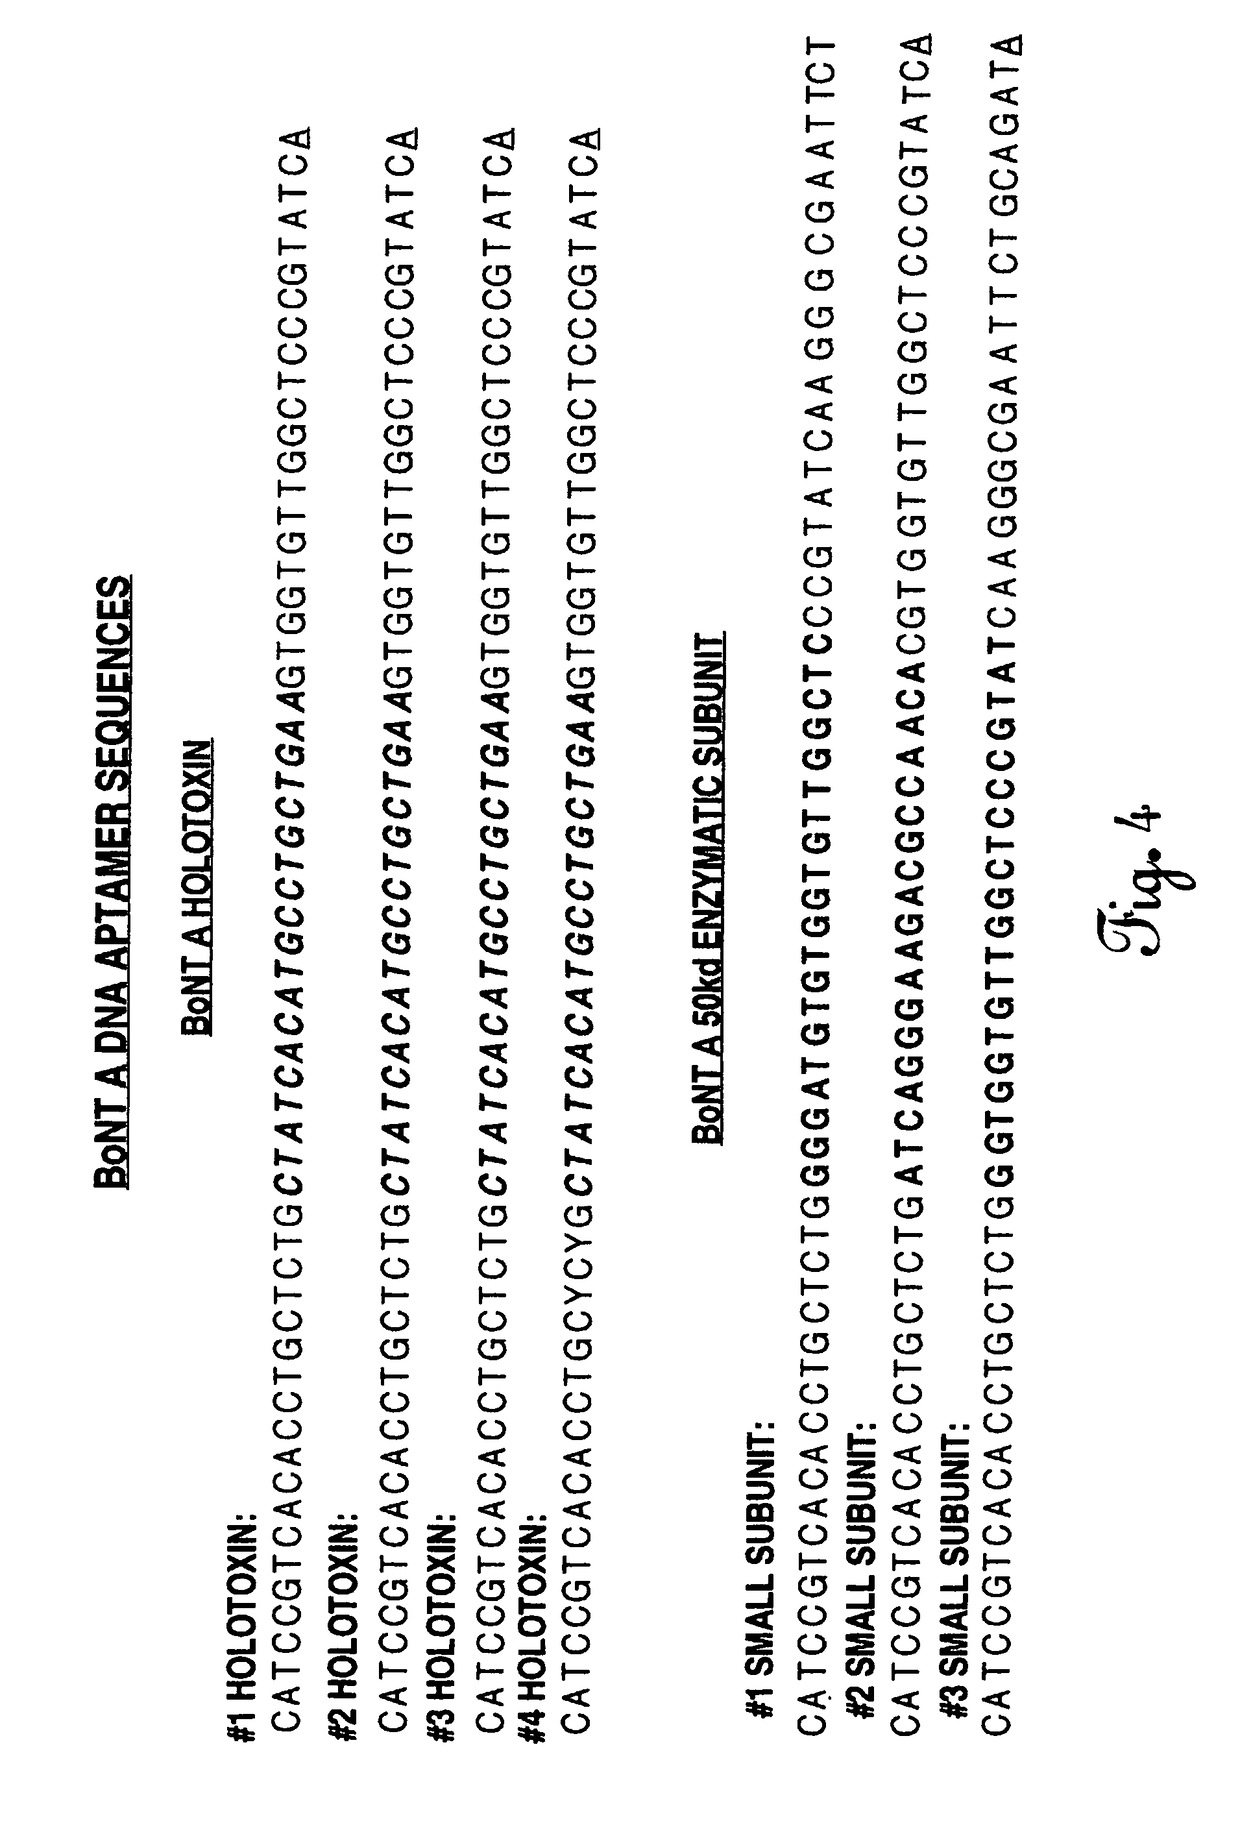 Methods of producing intrachain fluorophore-quencher FRET-aptamers and assays